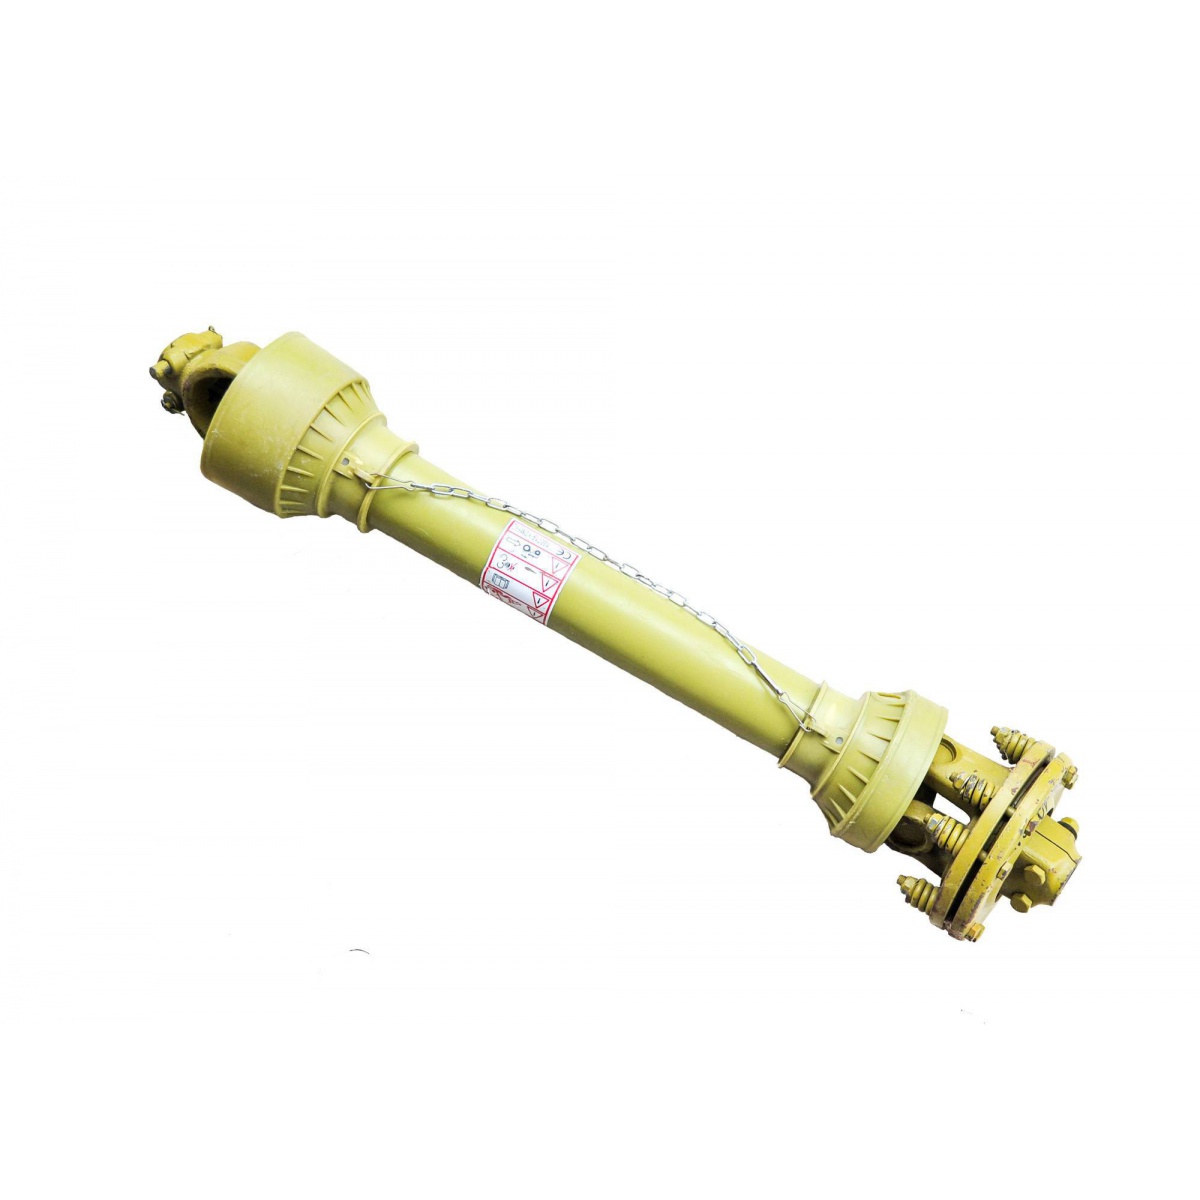 PTO shaft with clutch 07B - 200 cm / up to 105 HP